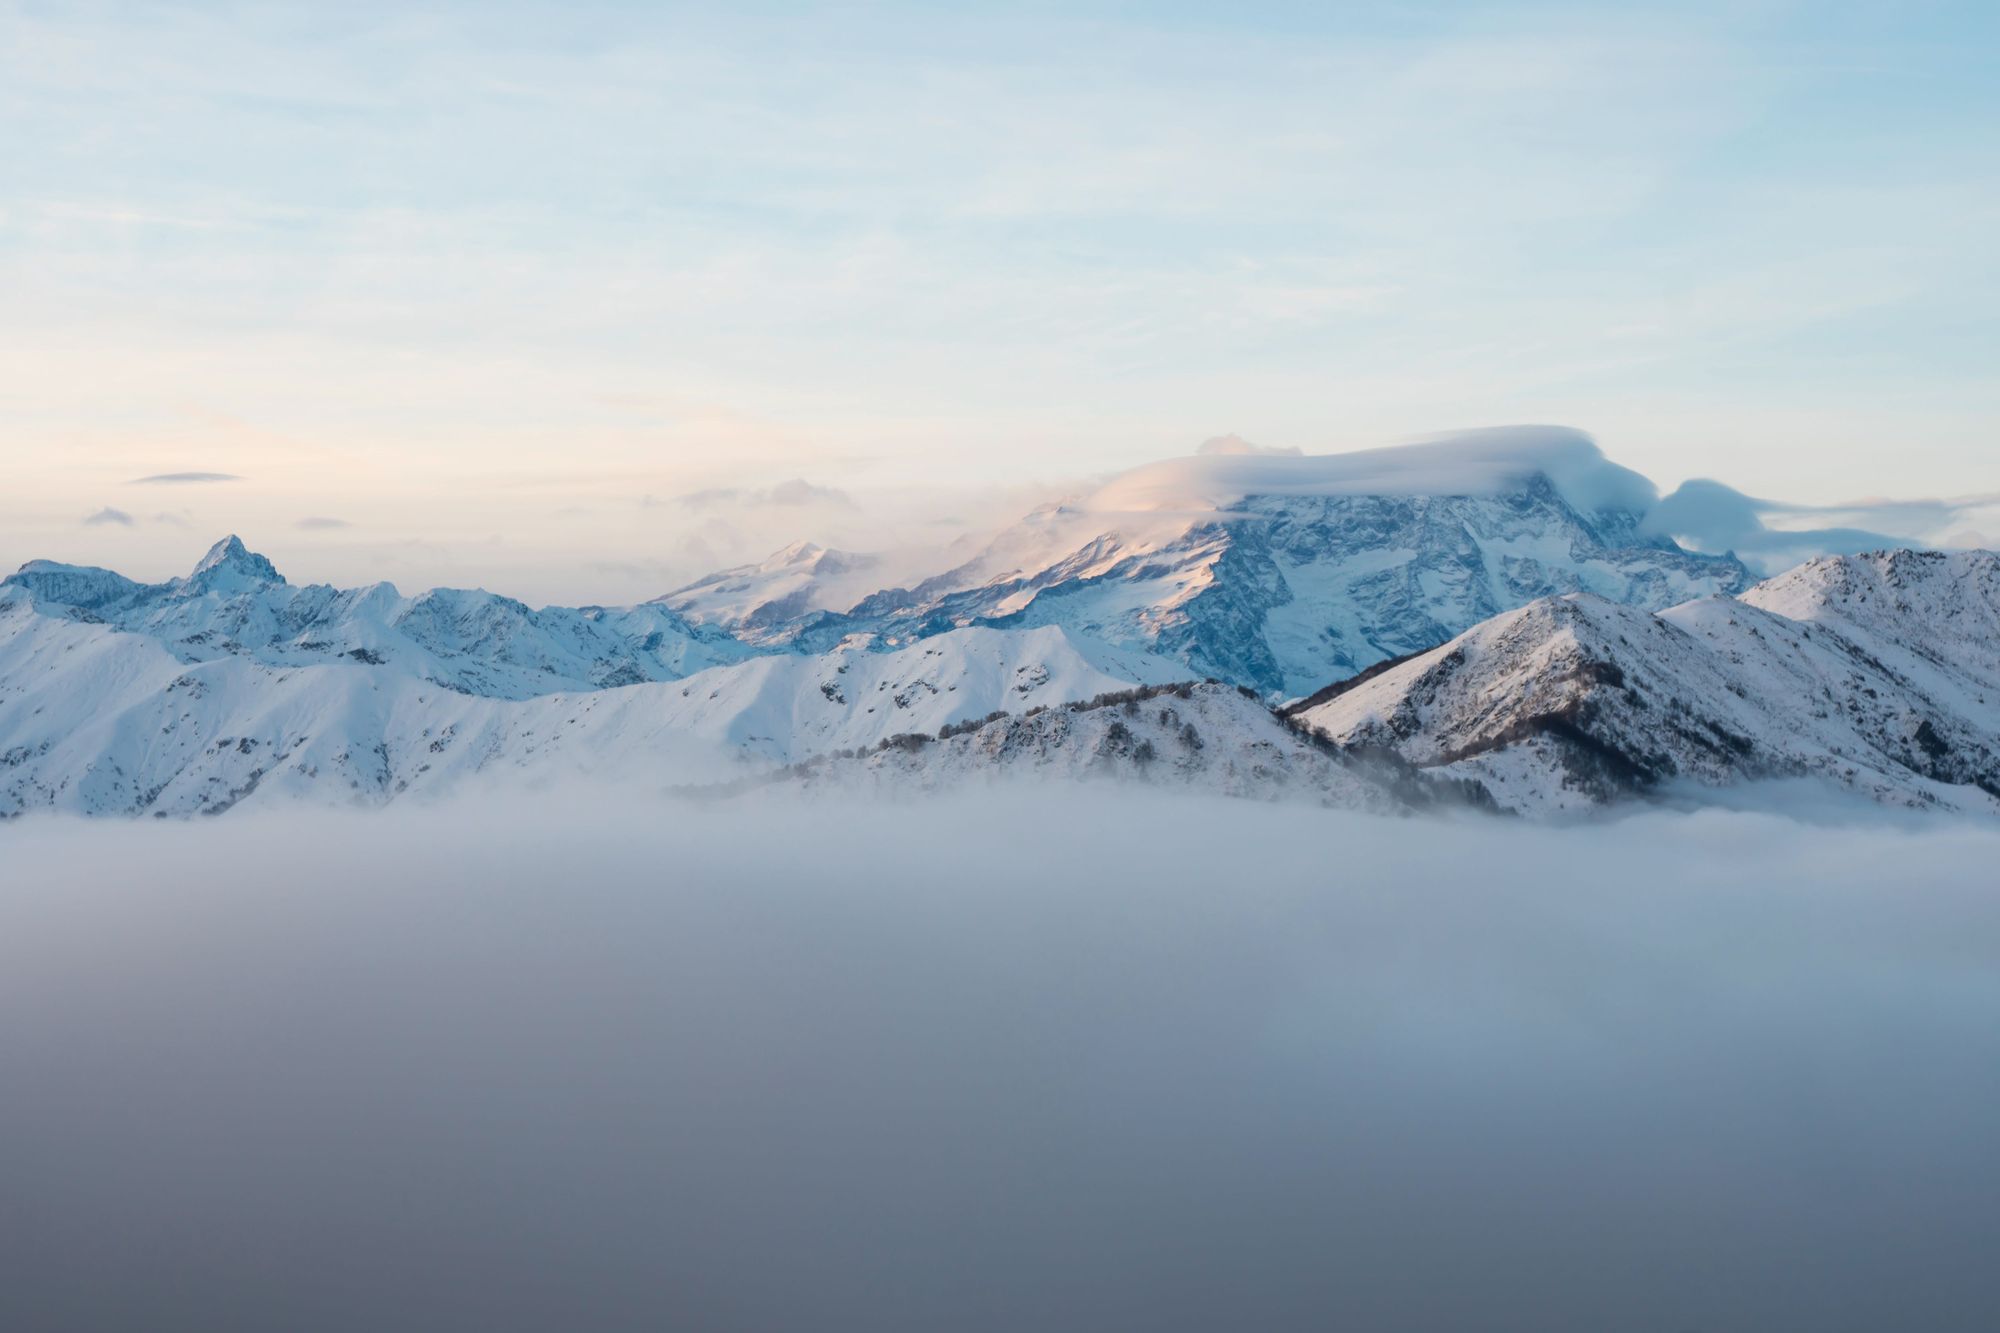 A winter panorama of the Italian Alps: Monte Rosa massif seen from the Biella pre-Alps. At sunset the fog rises from the valley bottom. Photo: Getty